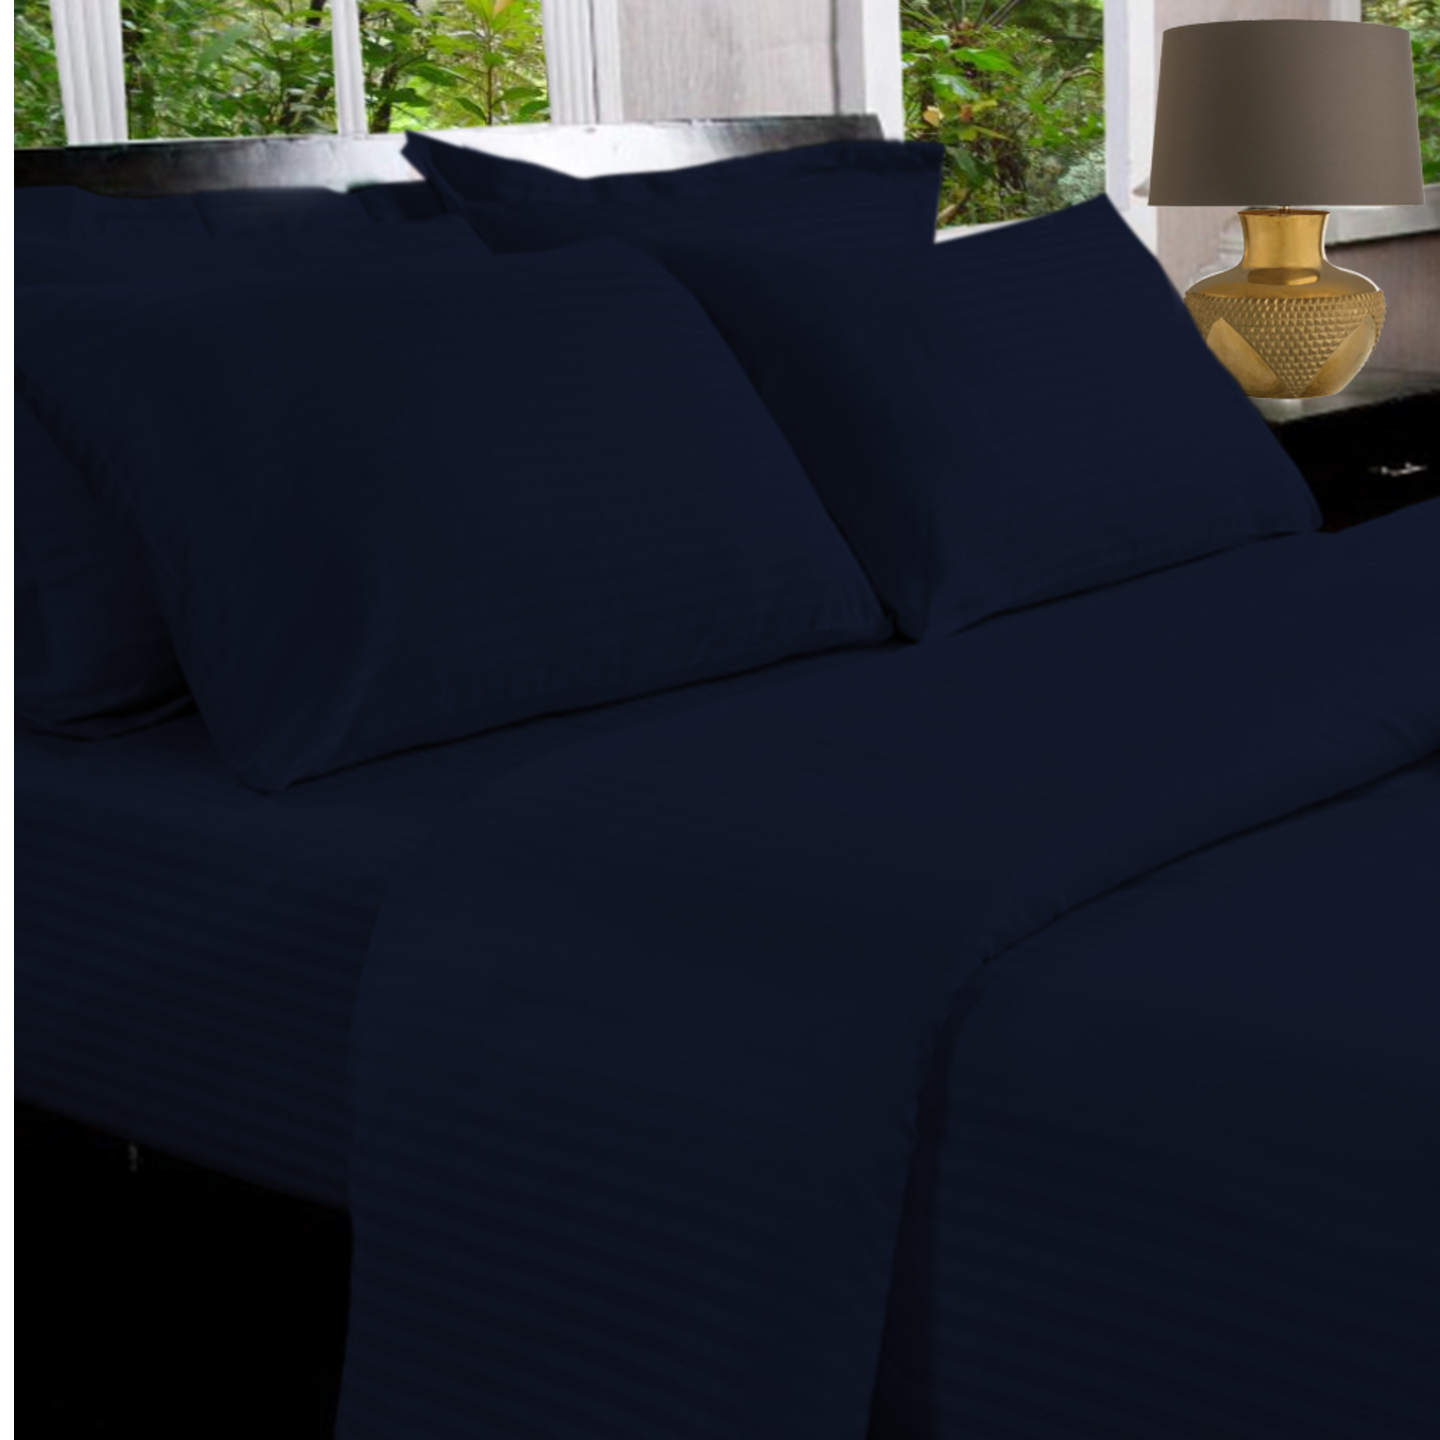 Dark Peacock Blue - 100% Cotton - 330 Thread Count -  Sateen Fitted Sheet - Queen Size 